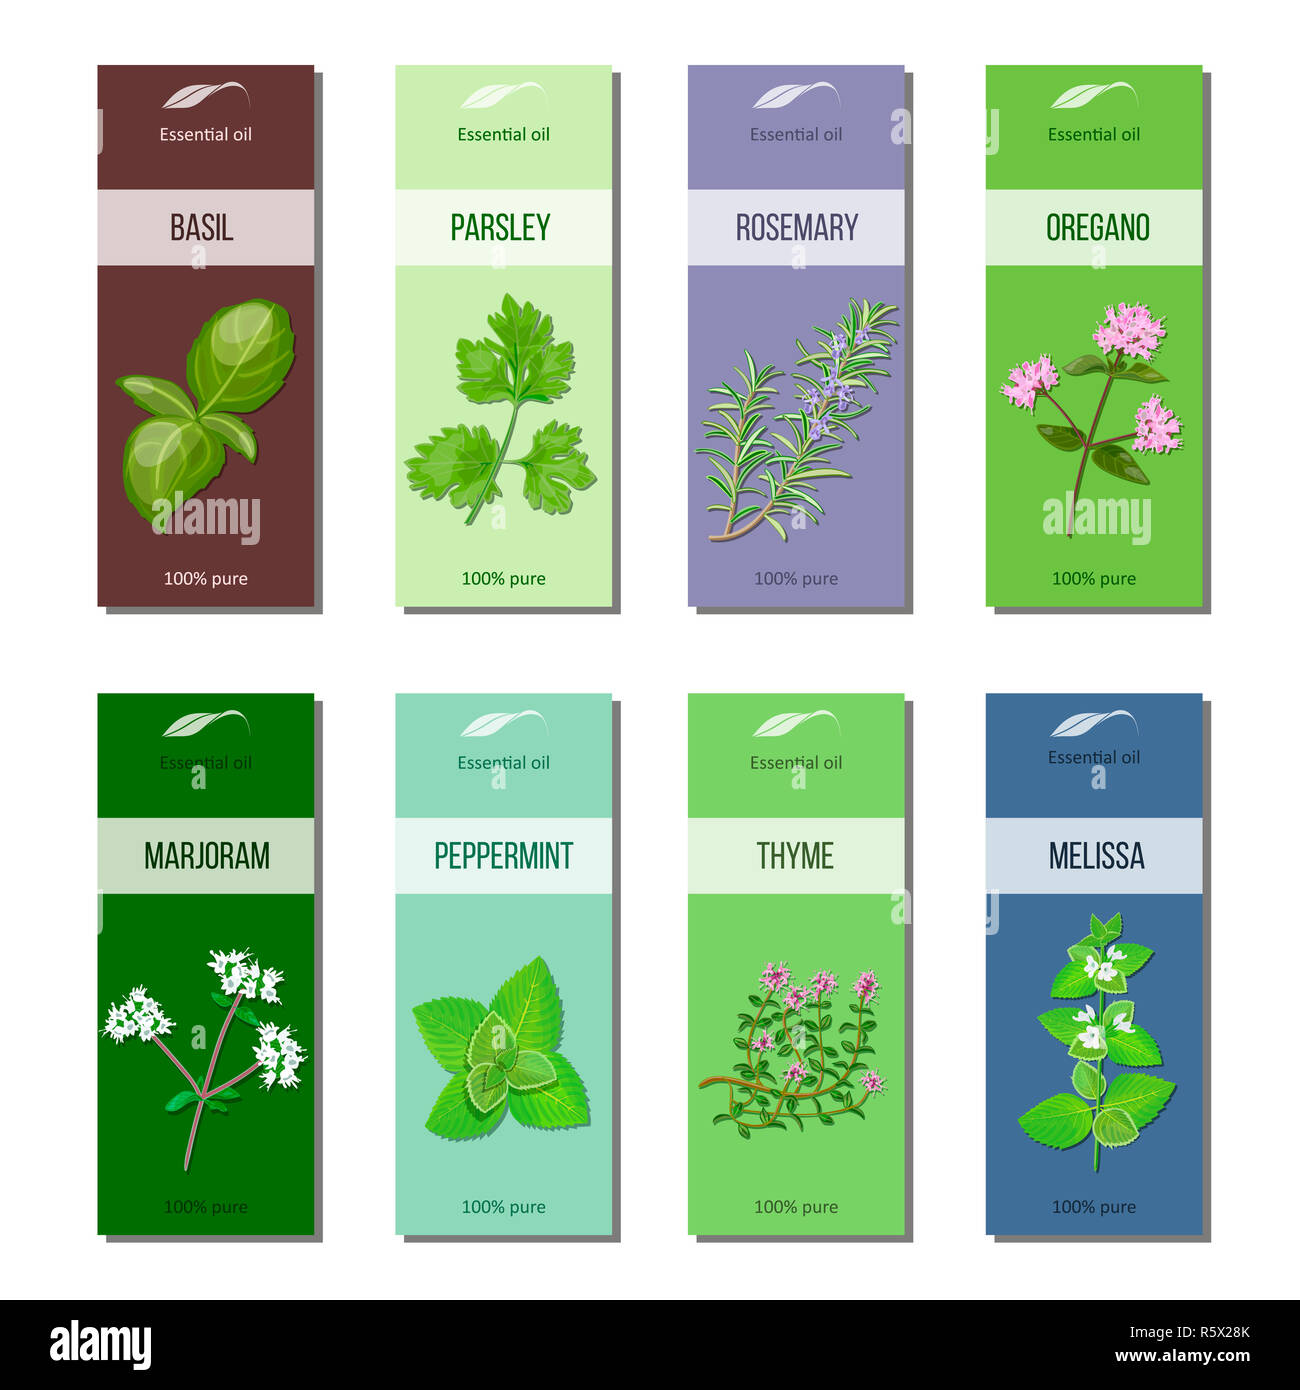 Essential oil labels collection. Basil, parsley, rosemary, oregano, marjoram, peppermint, melissa, thyme. Stripes Stock Photo